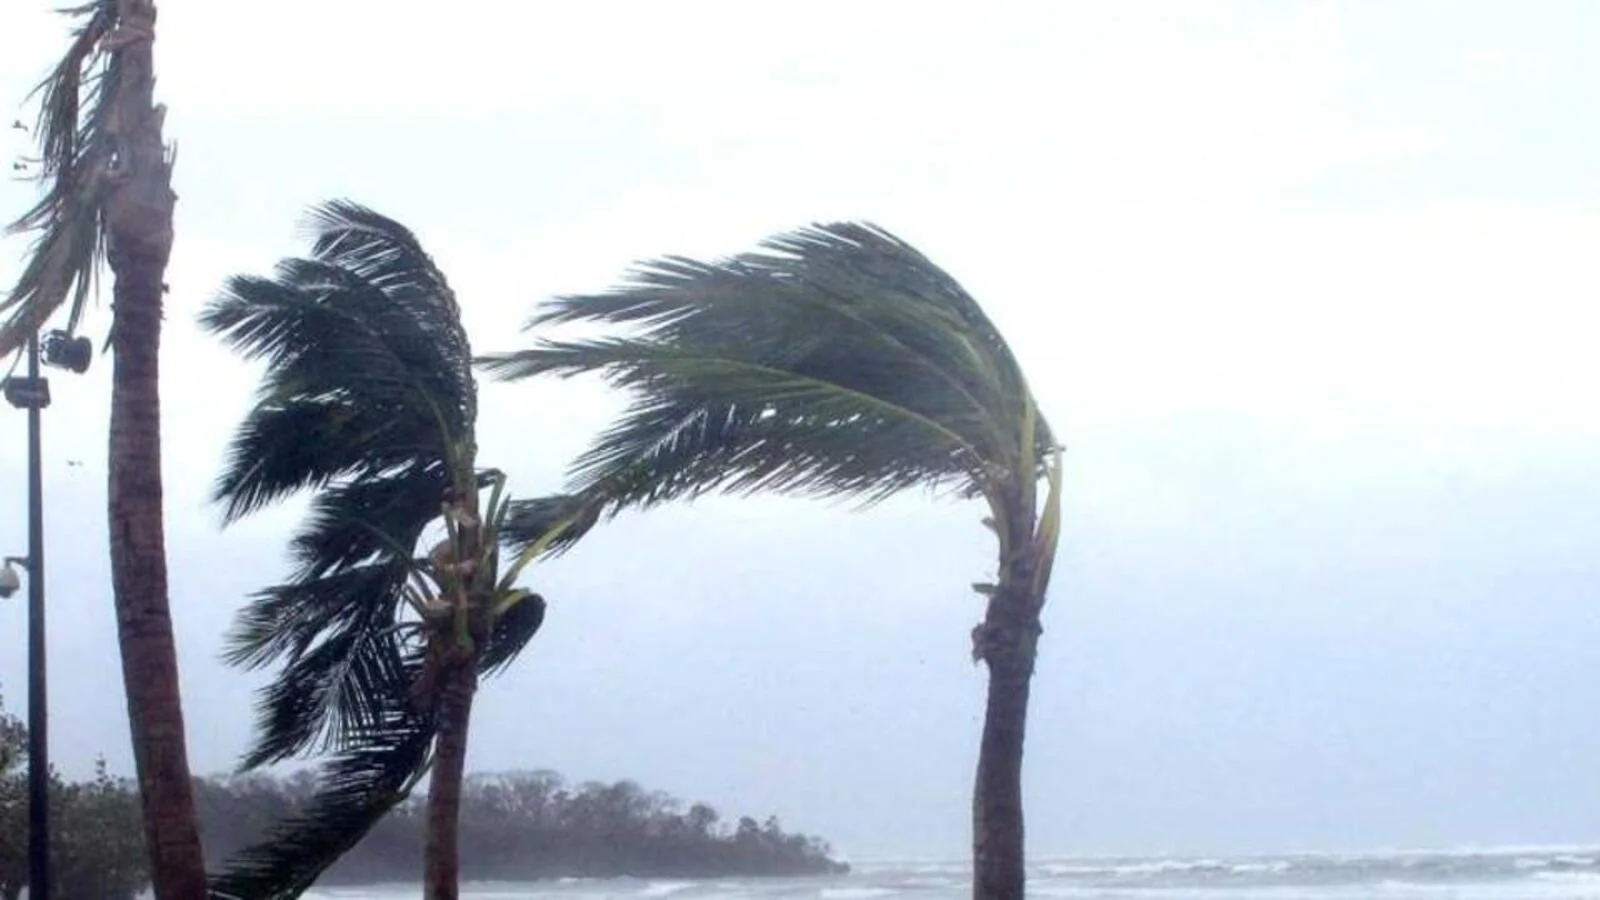 Year’s 1st cyclone Asani likely to form over Bay of Bengal on Mar 21